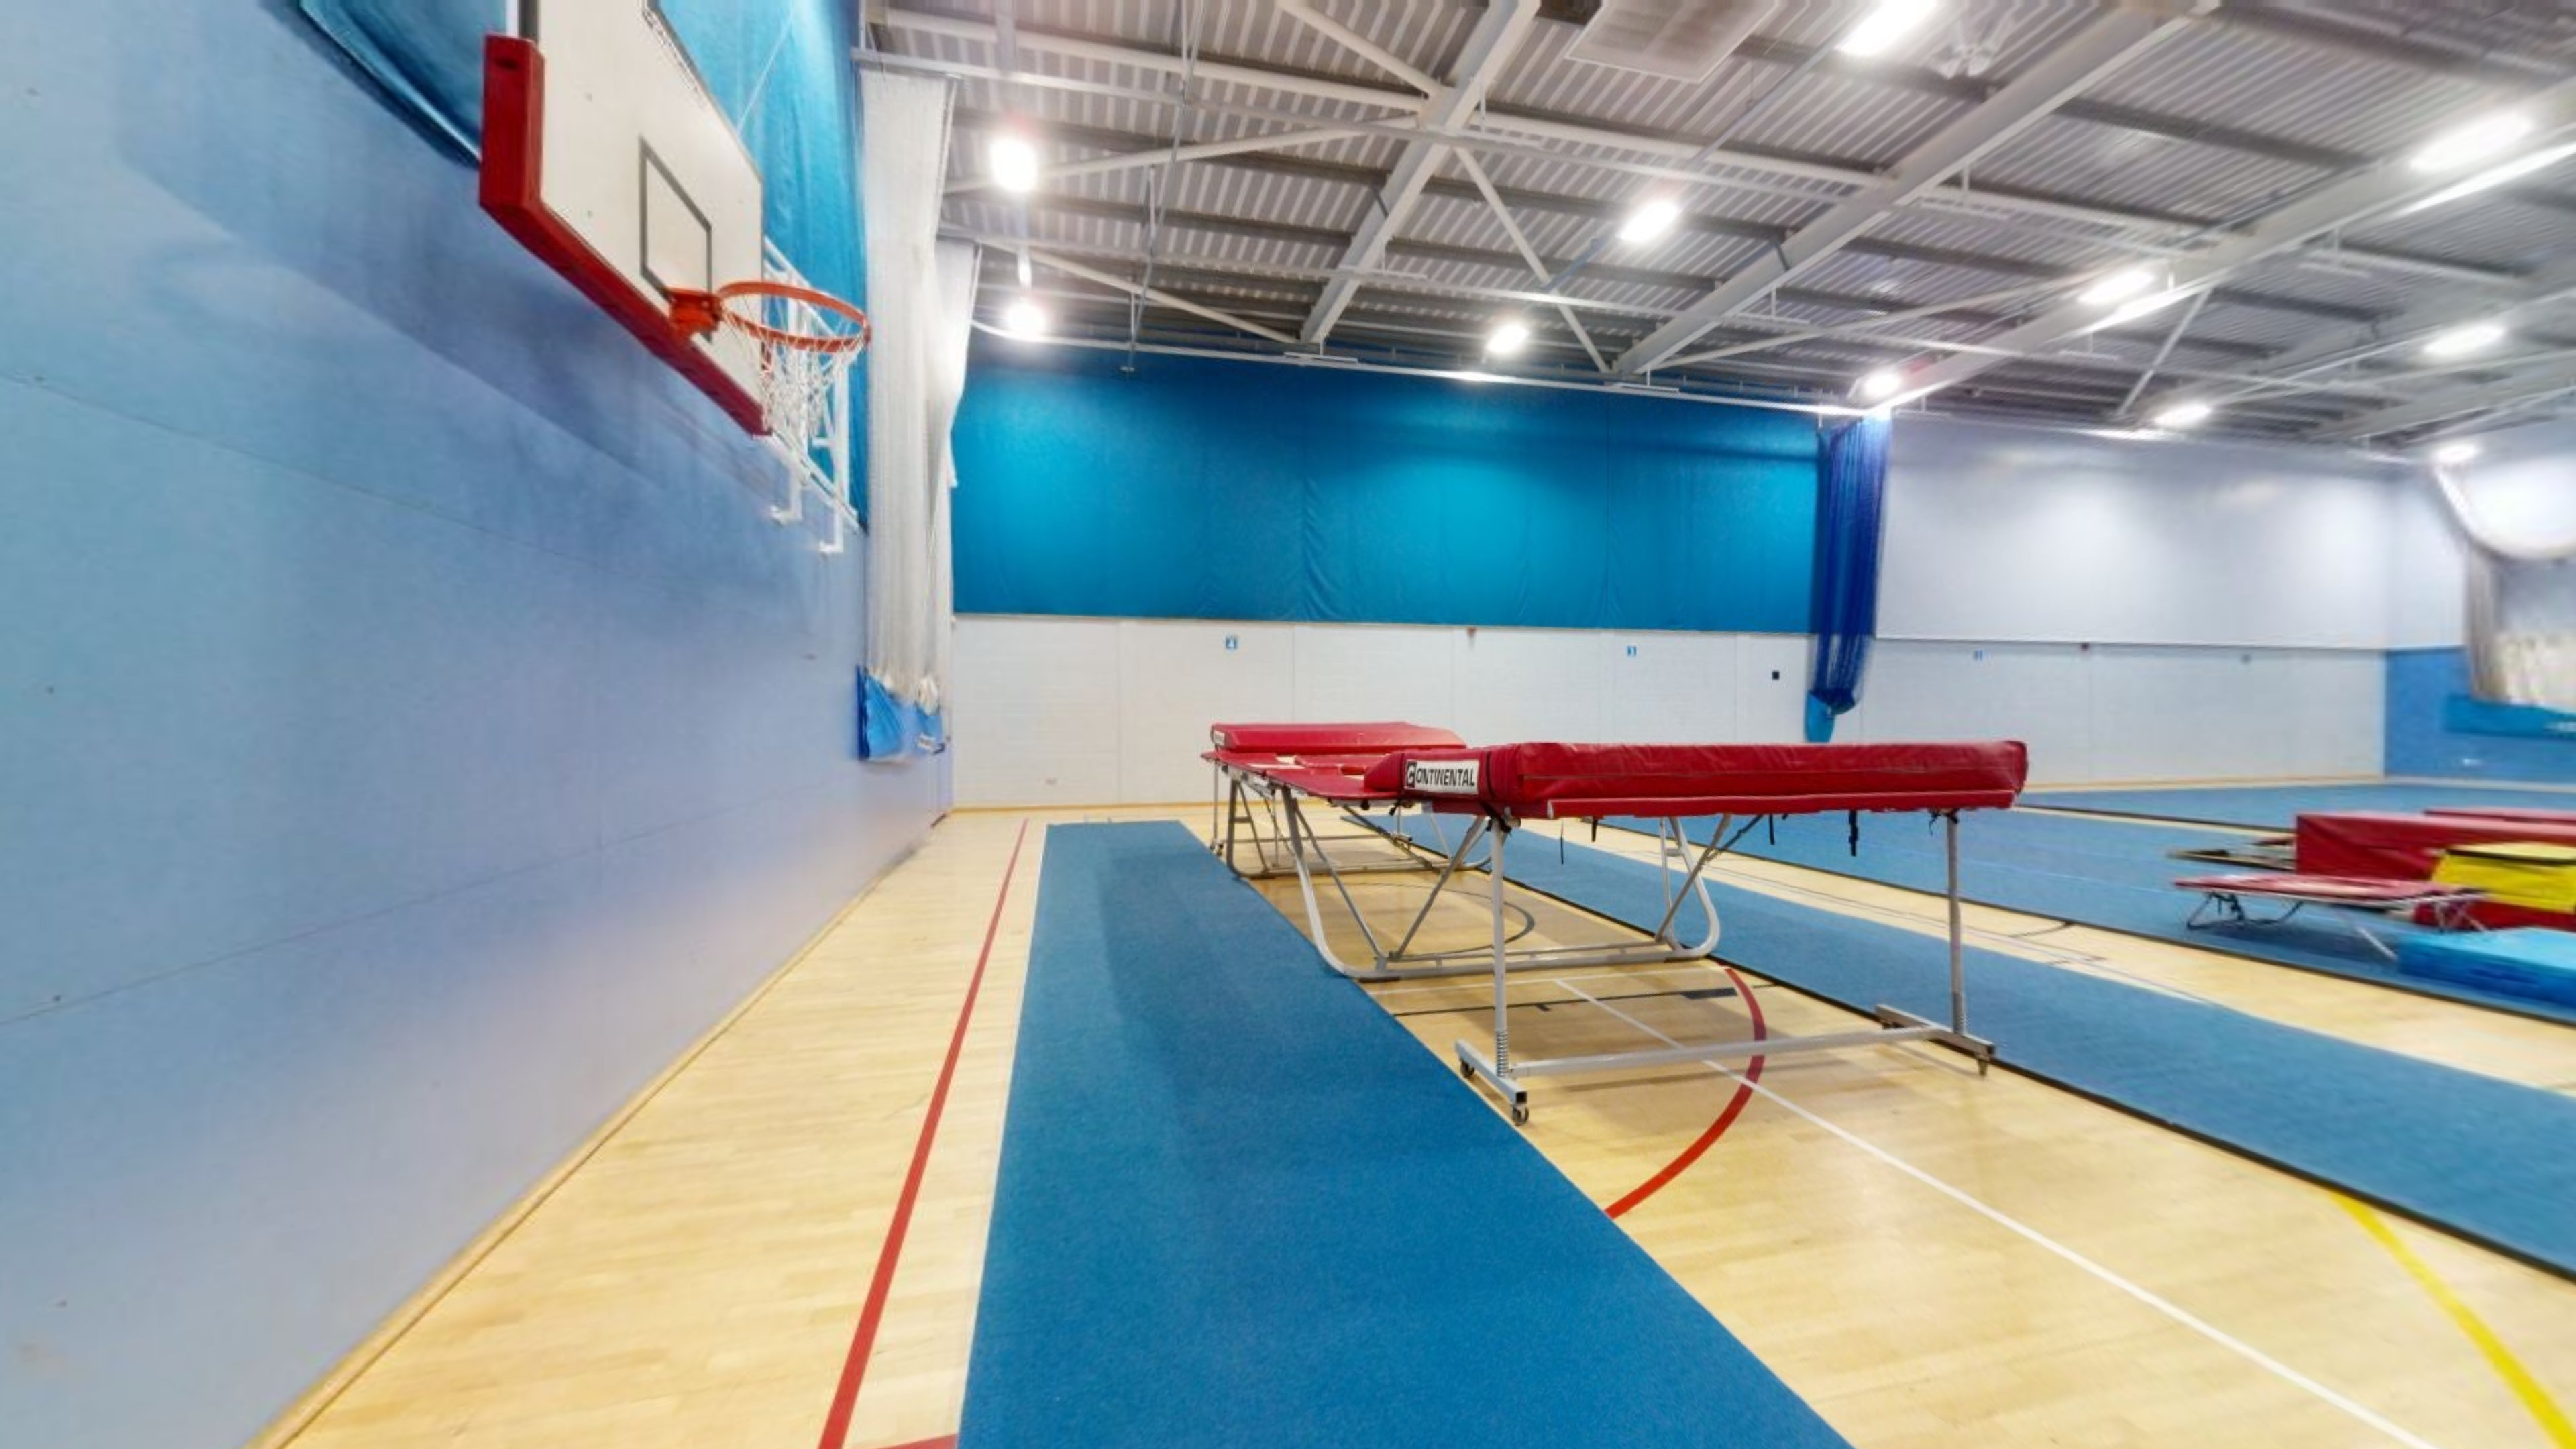 Images Maltby Leisure Centre